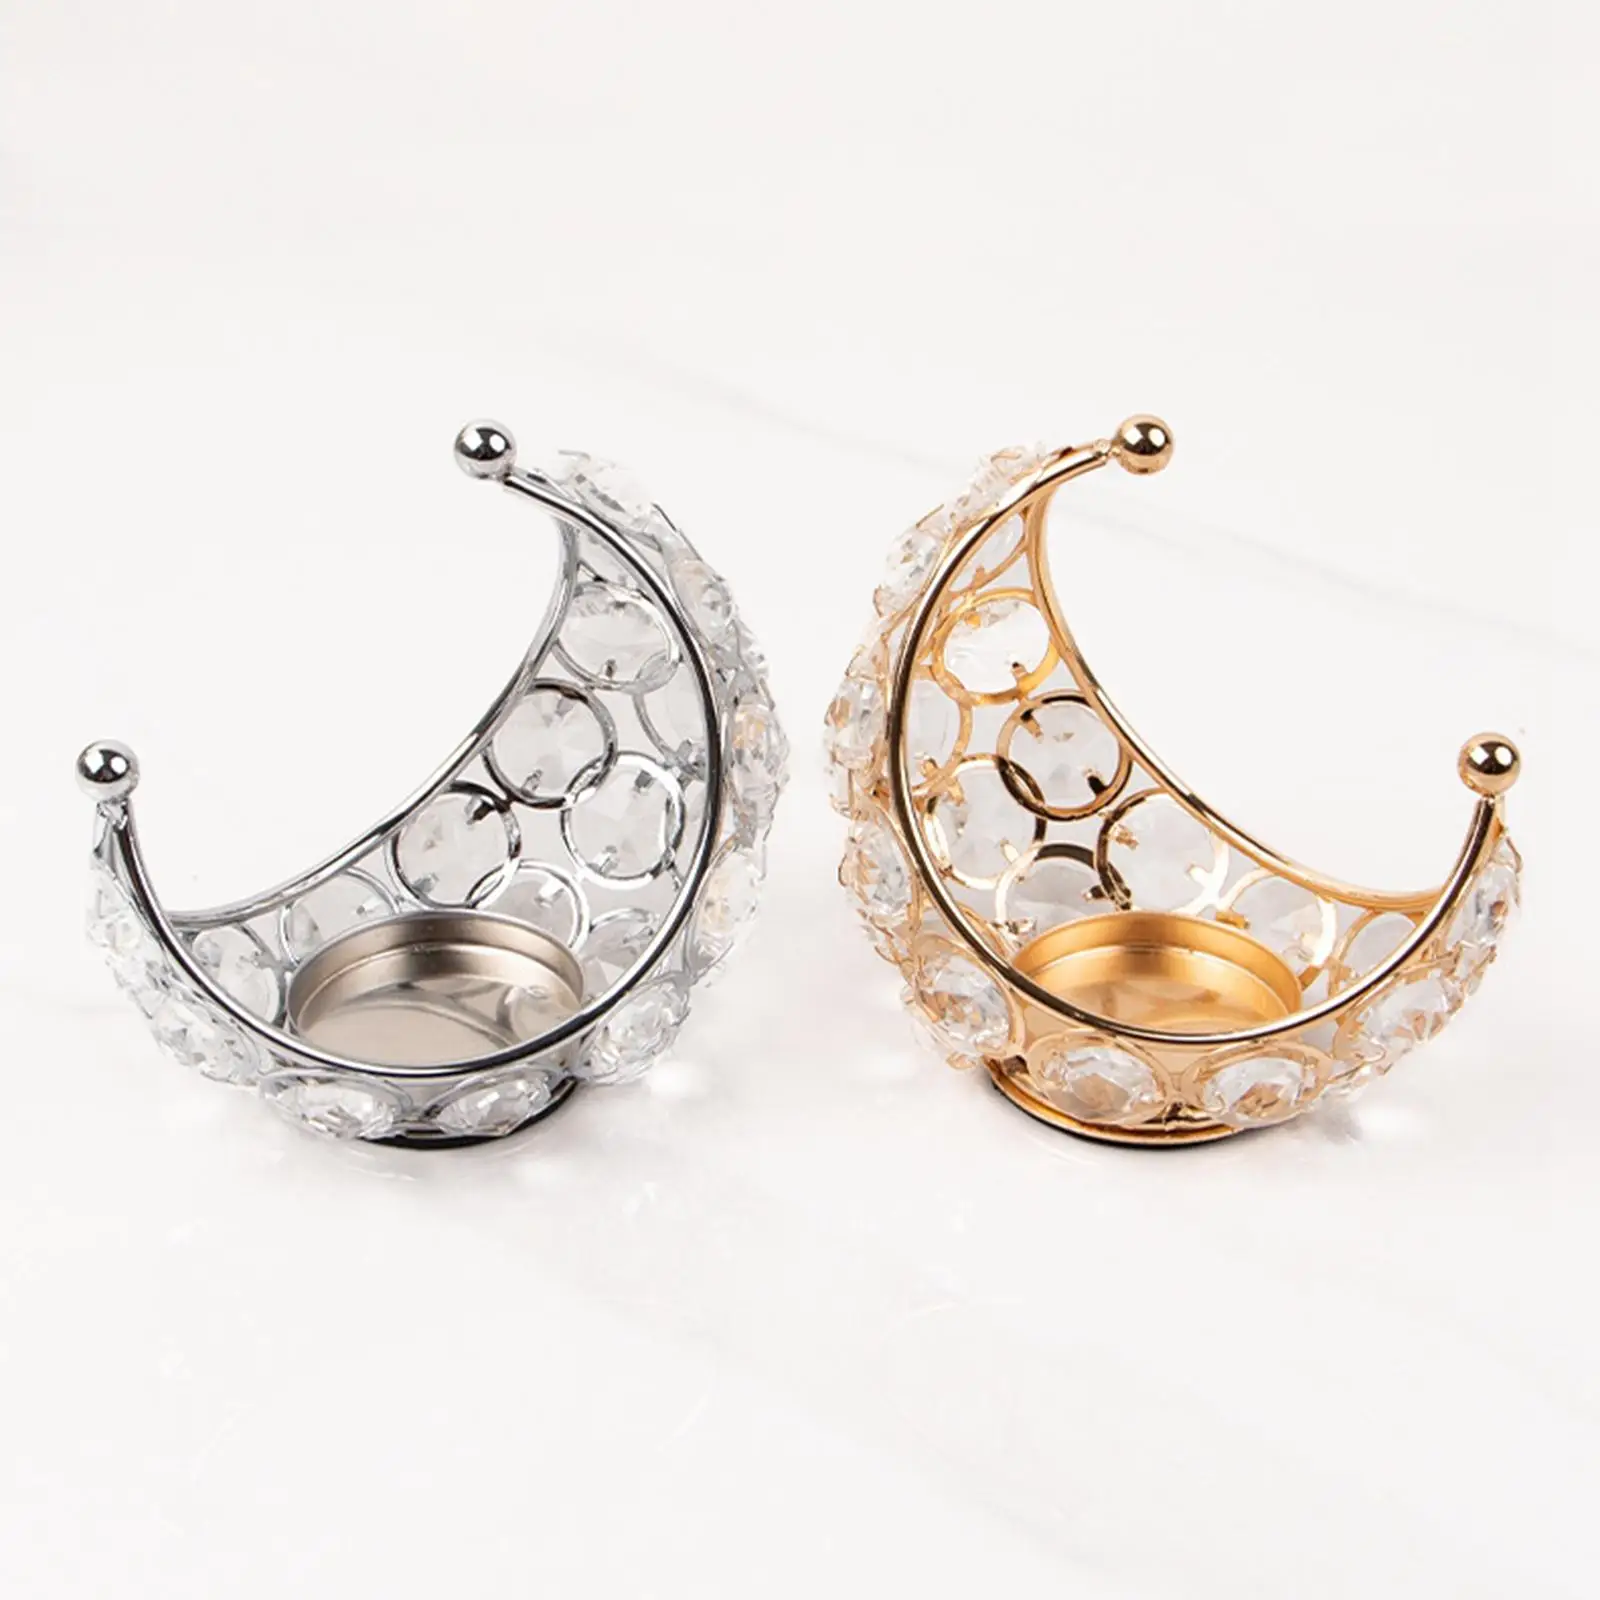 Moon Candle Holder Candlestick Ornament for Dining Table Wedding Decoration